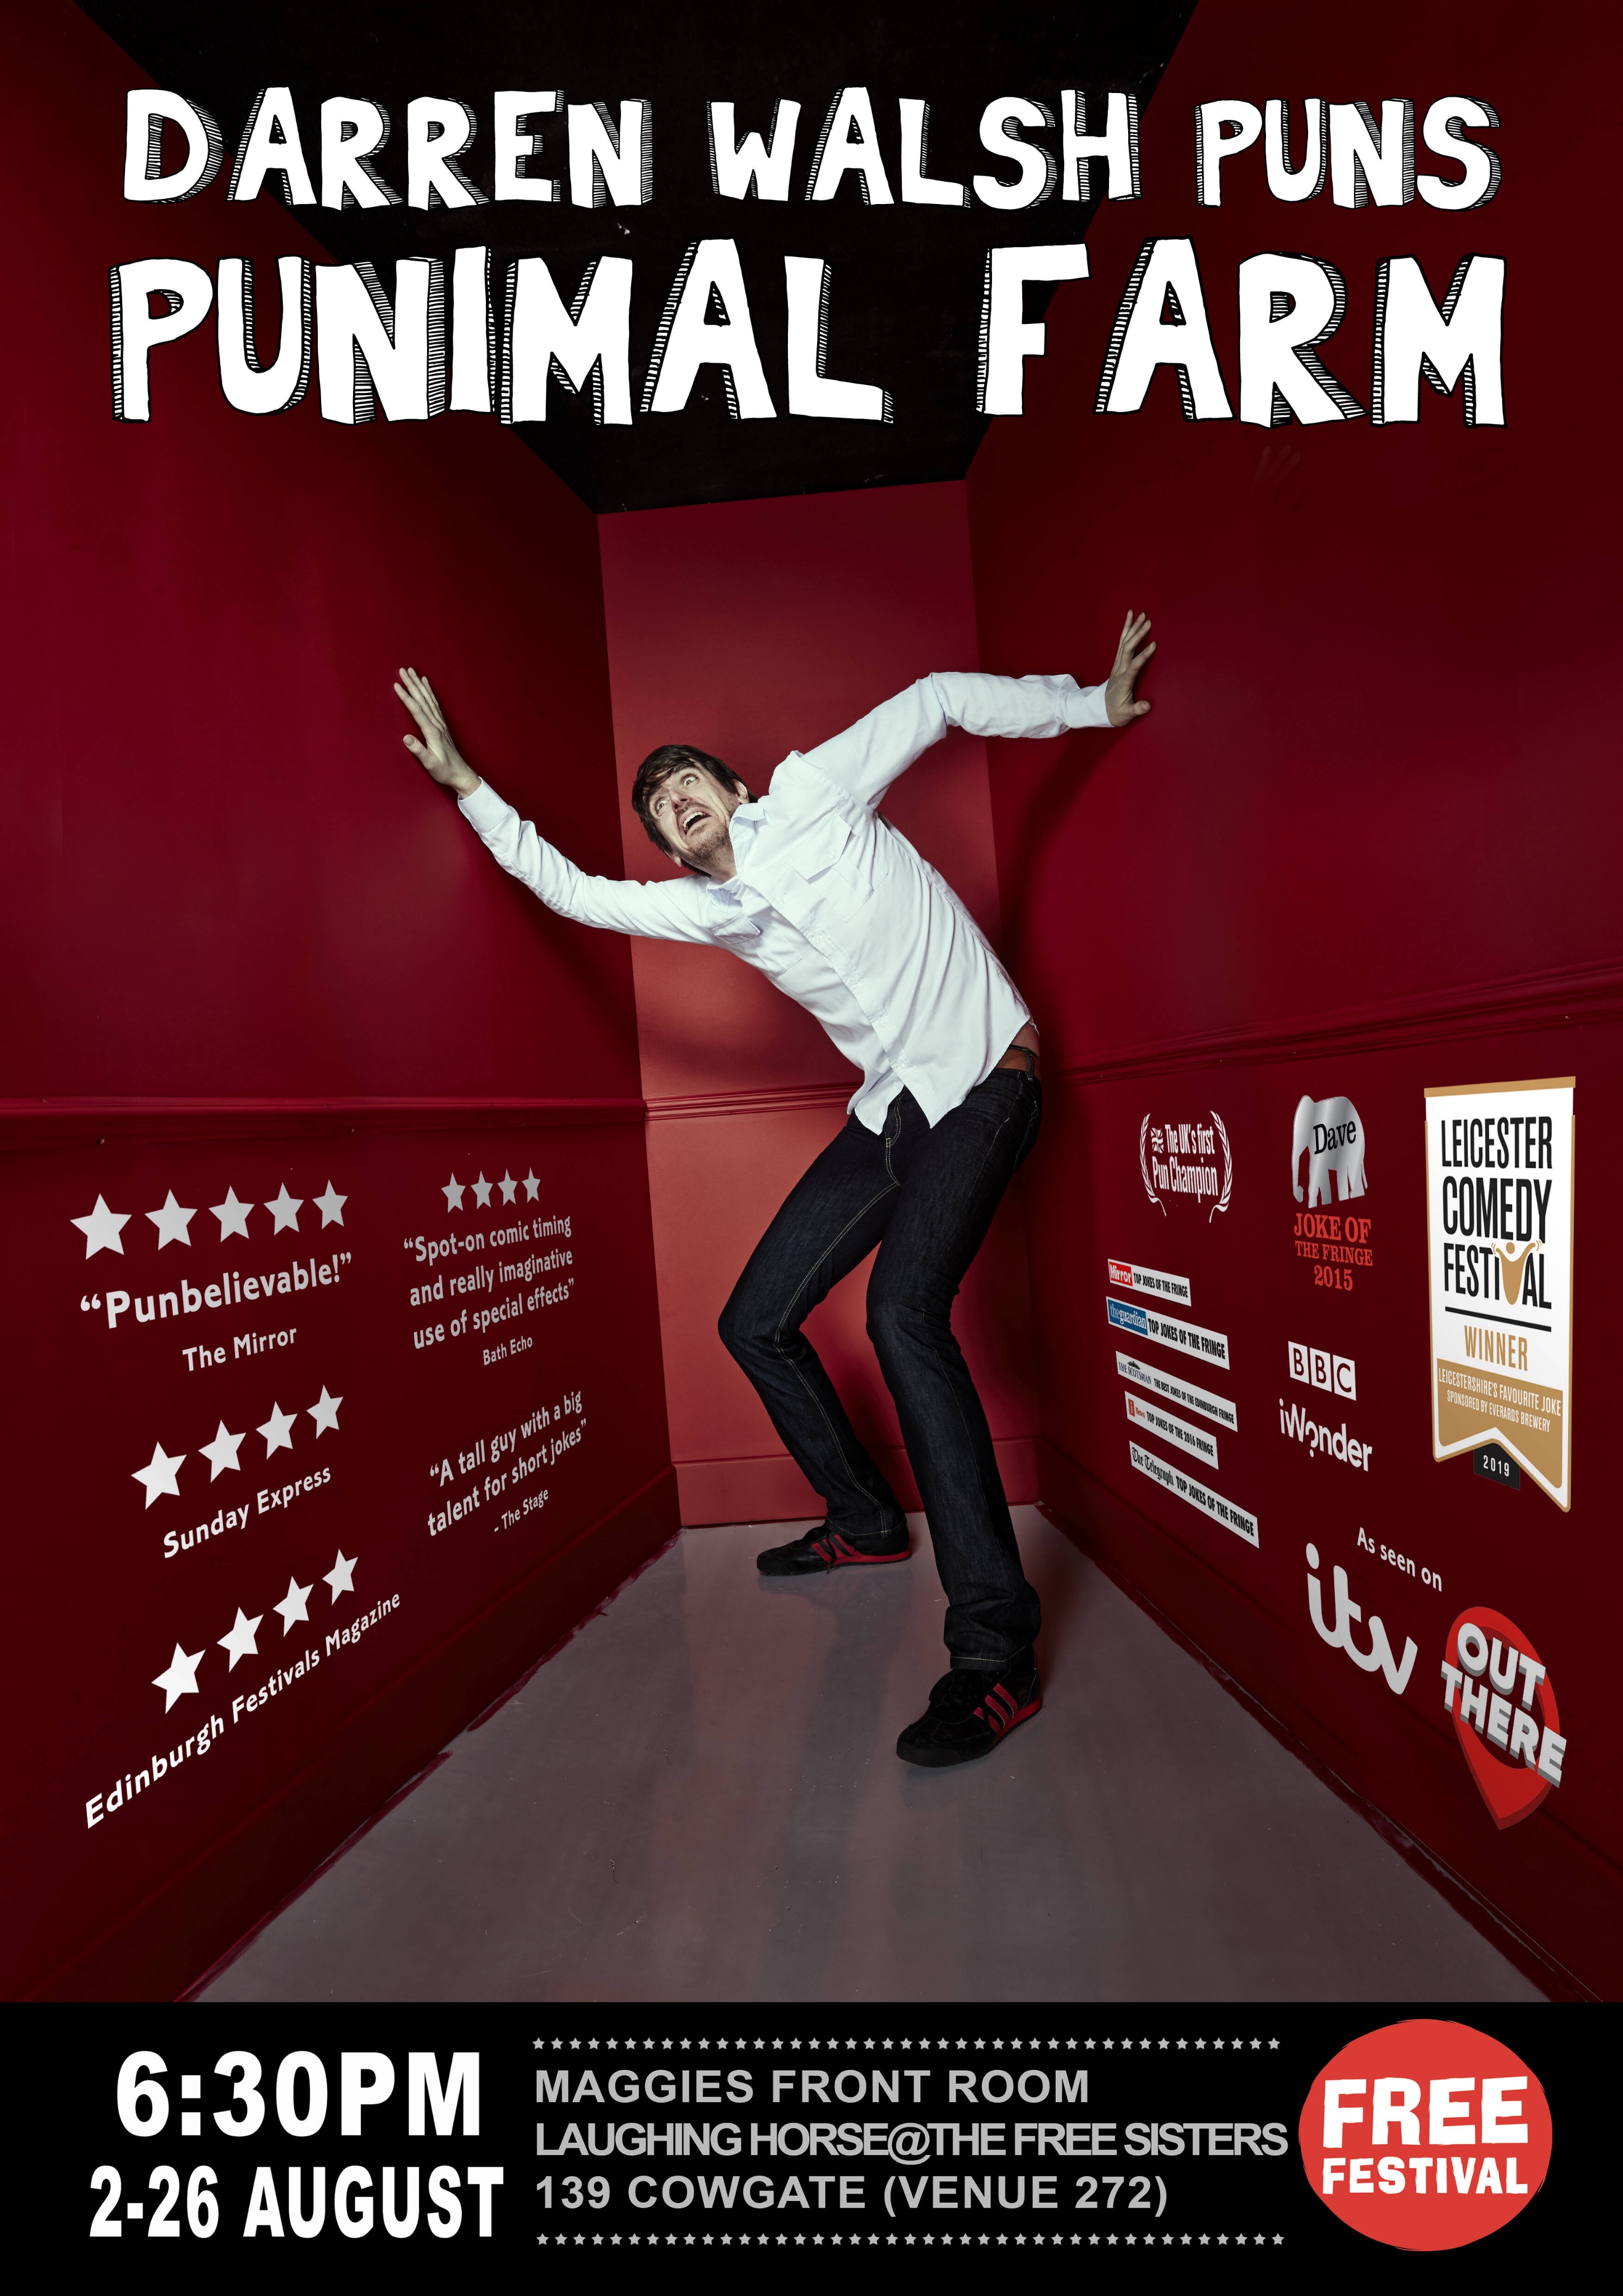 The poster for Darren Walsh: Punimal Farm